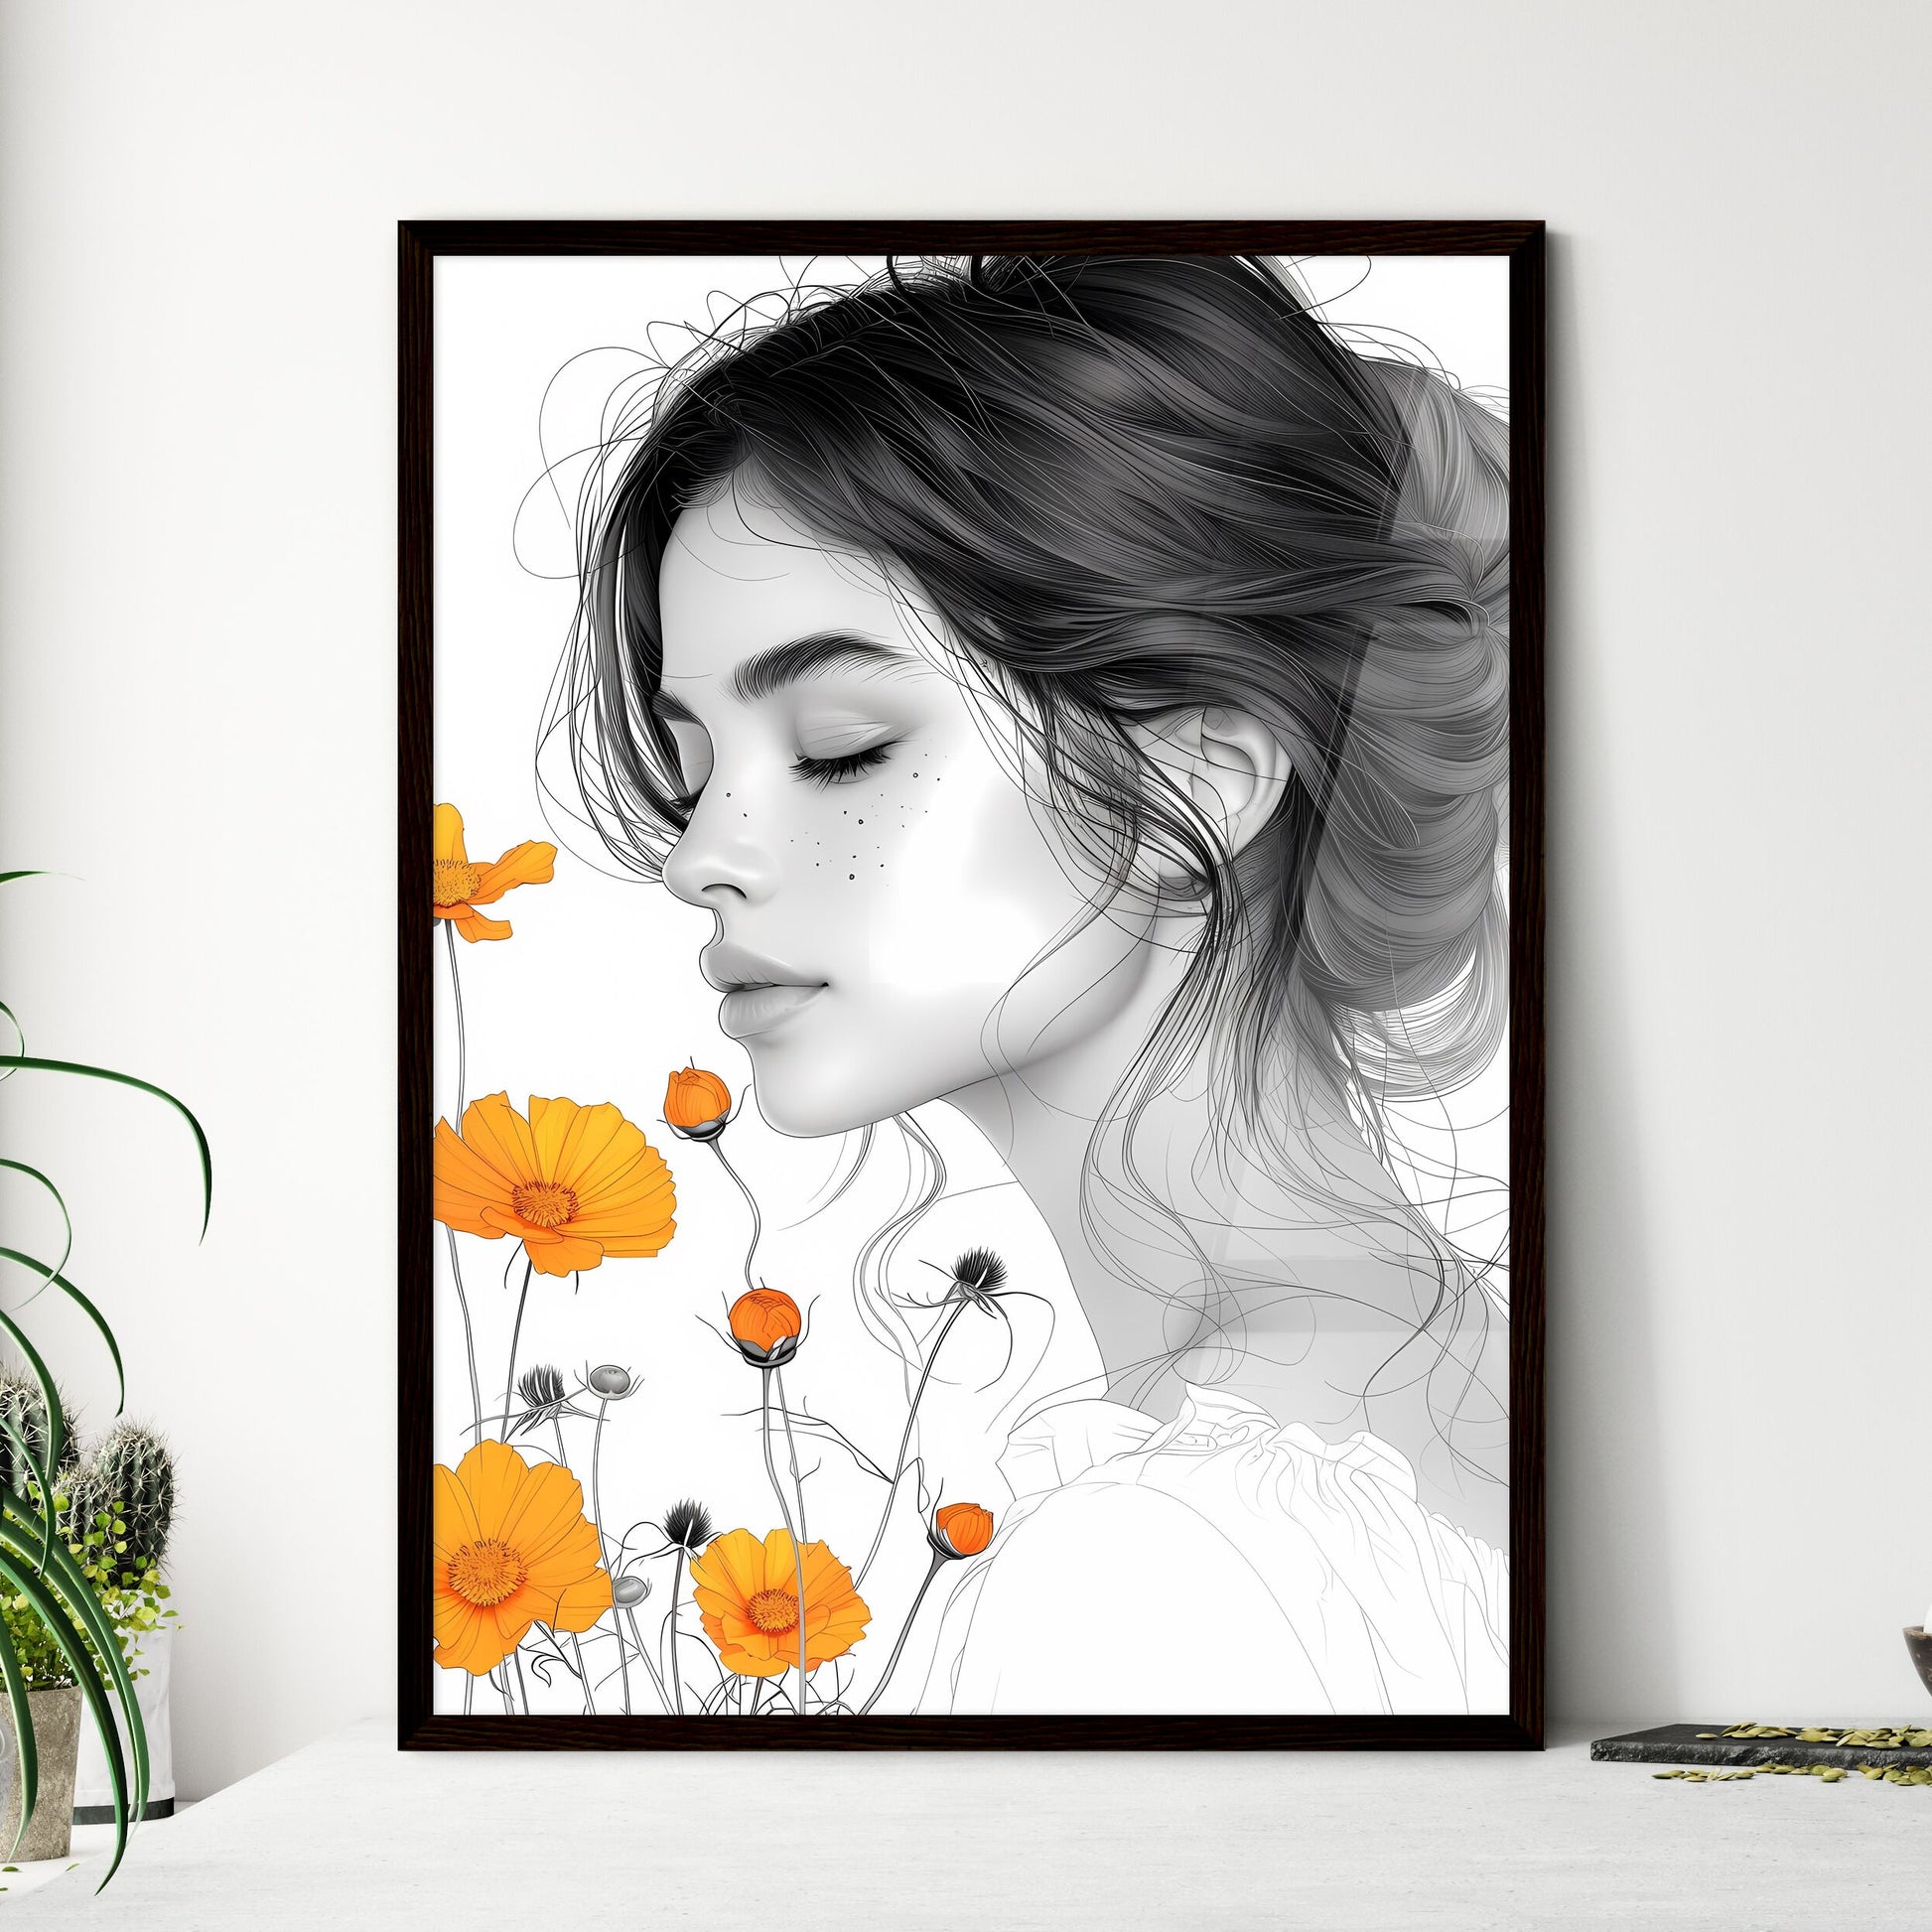 Minimalist Floral Line Art Woman Poster Print with Closed Eyes and Vibrant Flowers on White Background Default Title